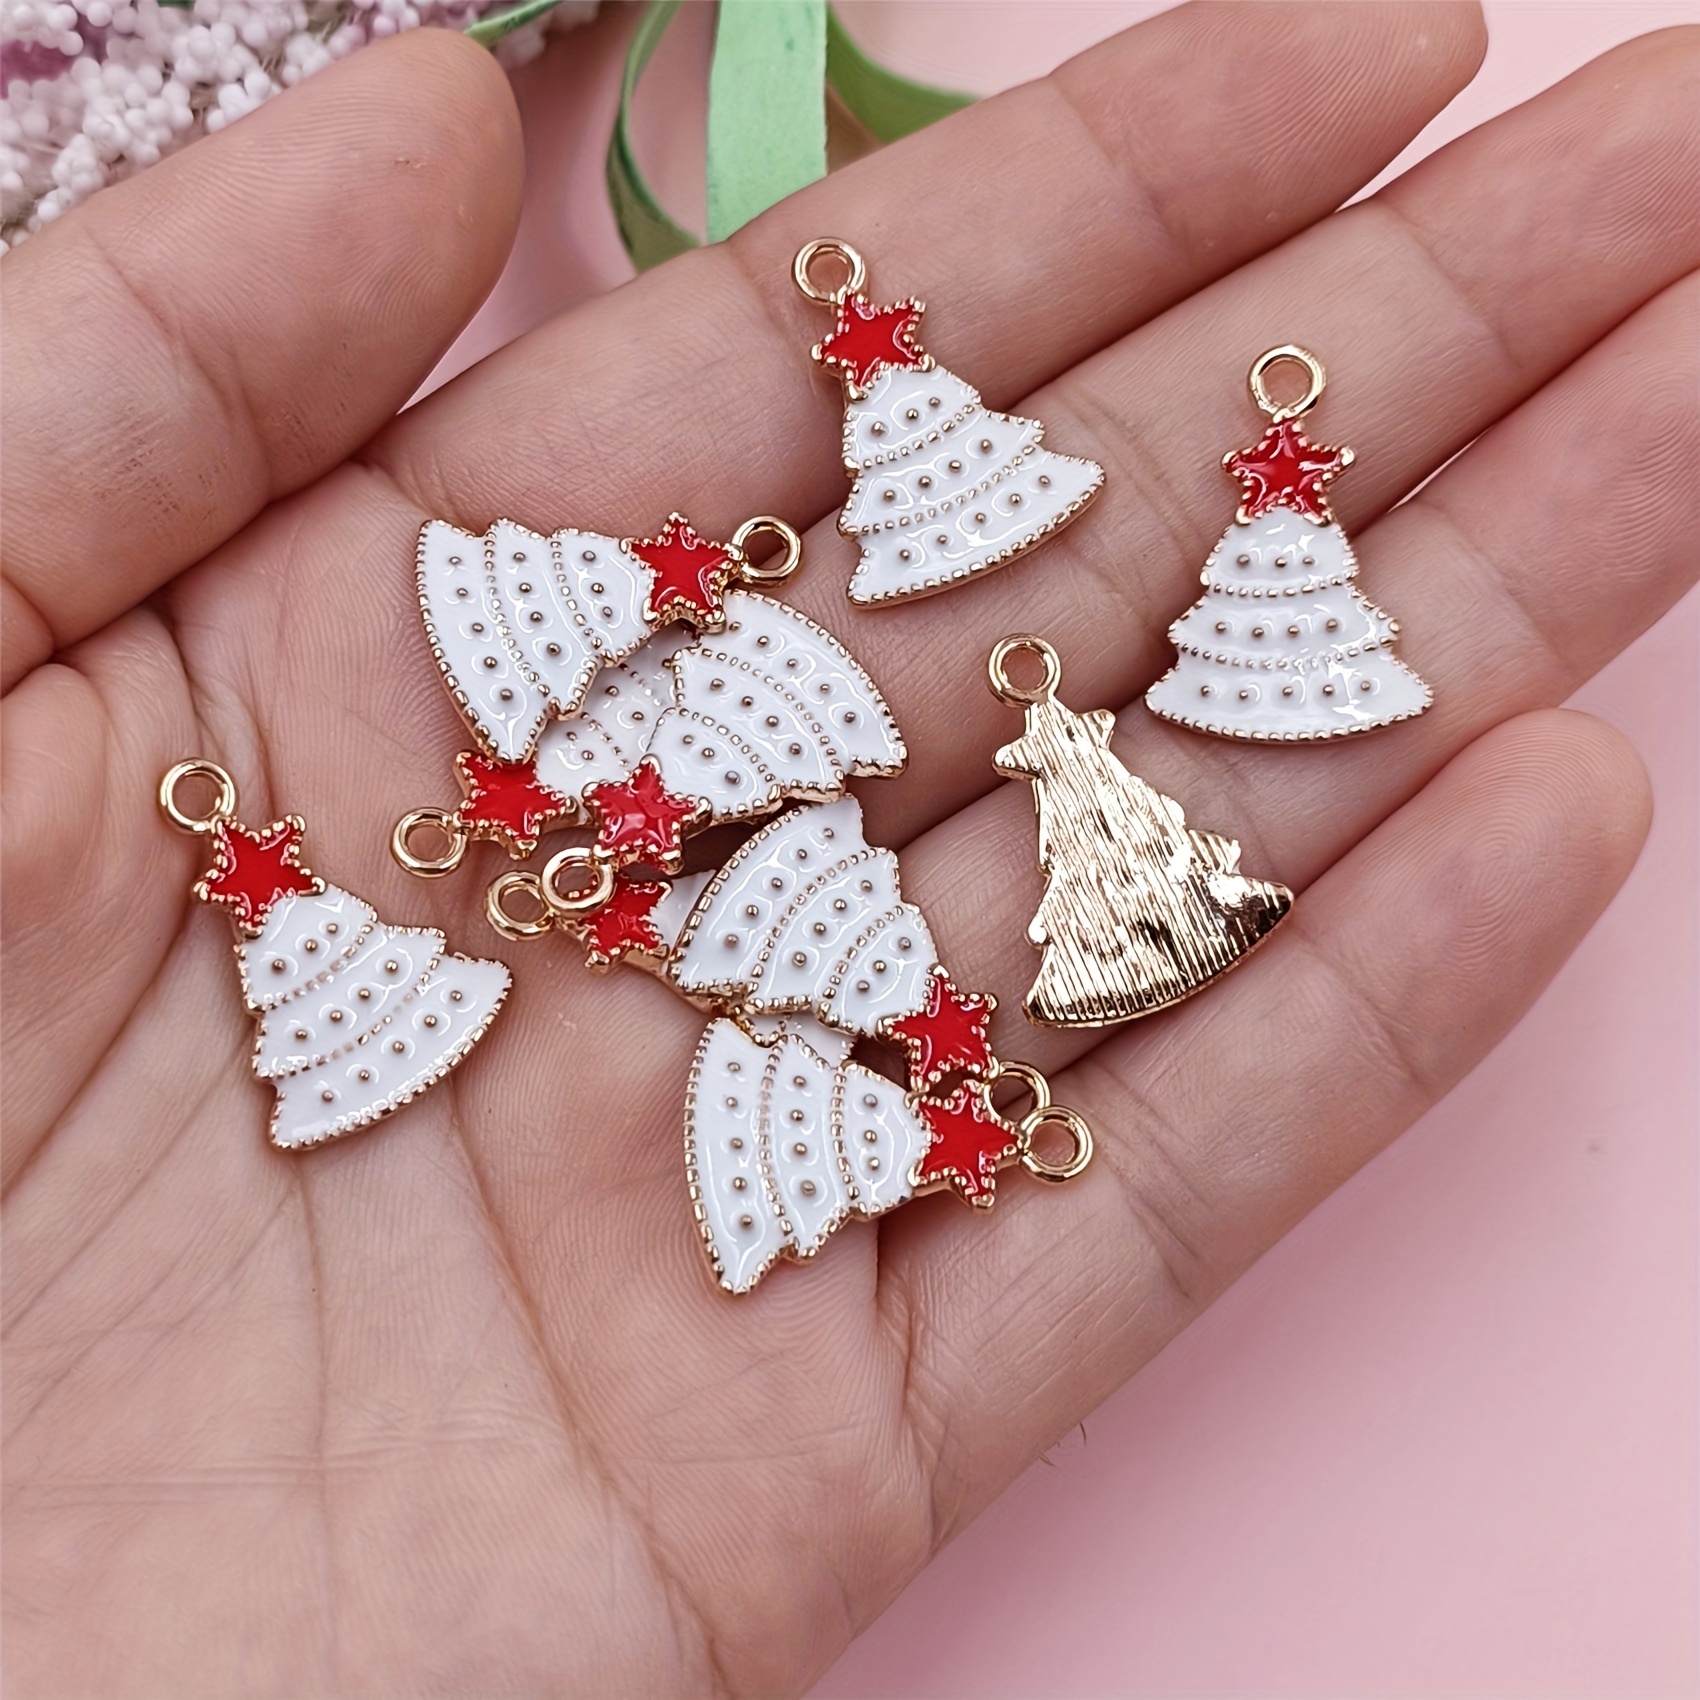 10pcs Enamel Drop Oil Snowflake Charms Pendant Accessories Christma  Handmade For Jewelry Making Diy Necklace Earring Decoration